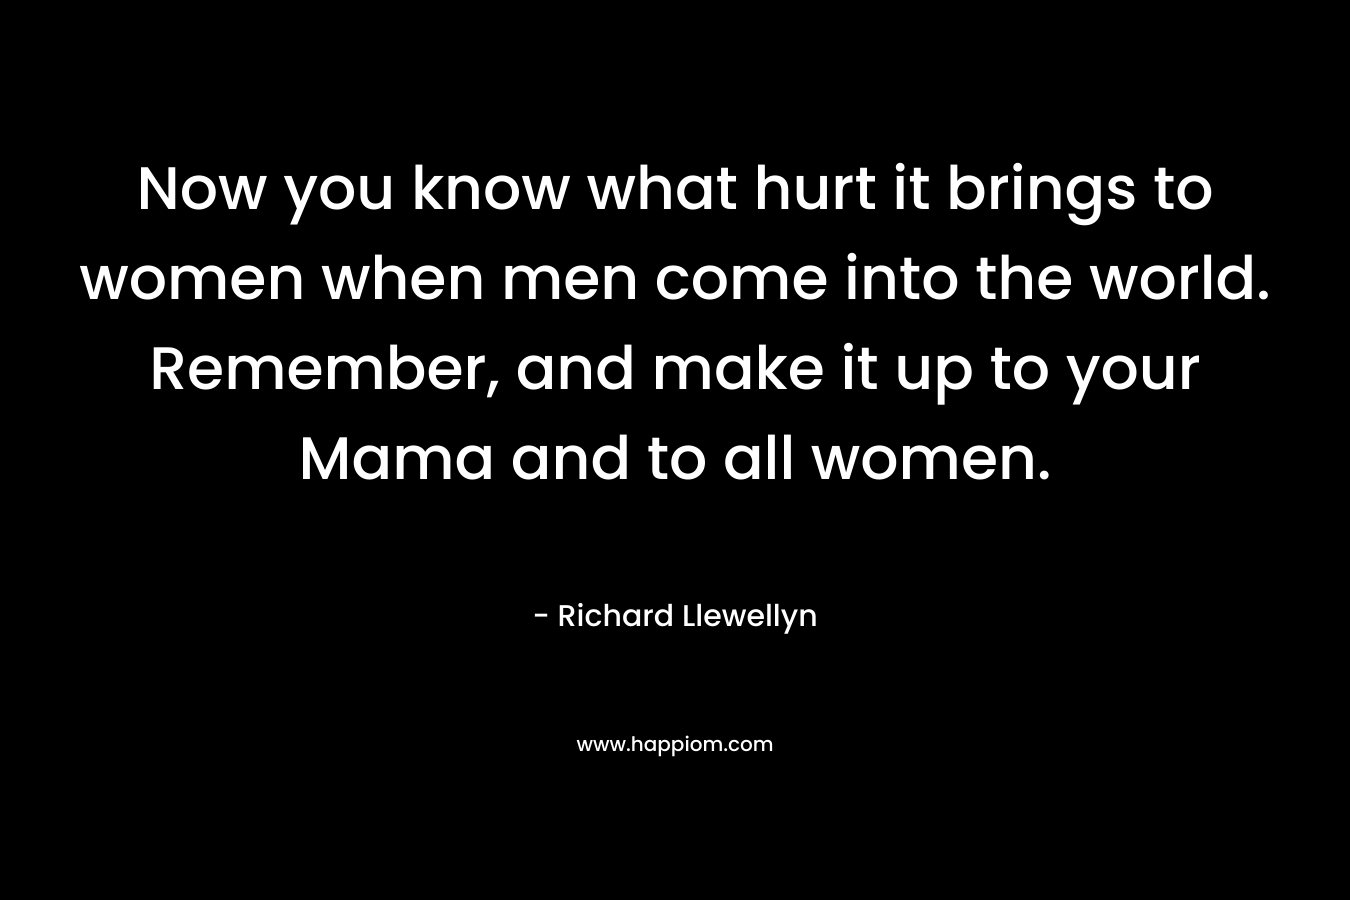 Now you know what hurt it brings to women when men come into the world. Remember, and make it up to your Mama and to all women.